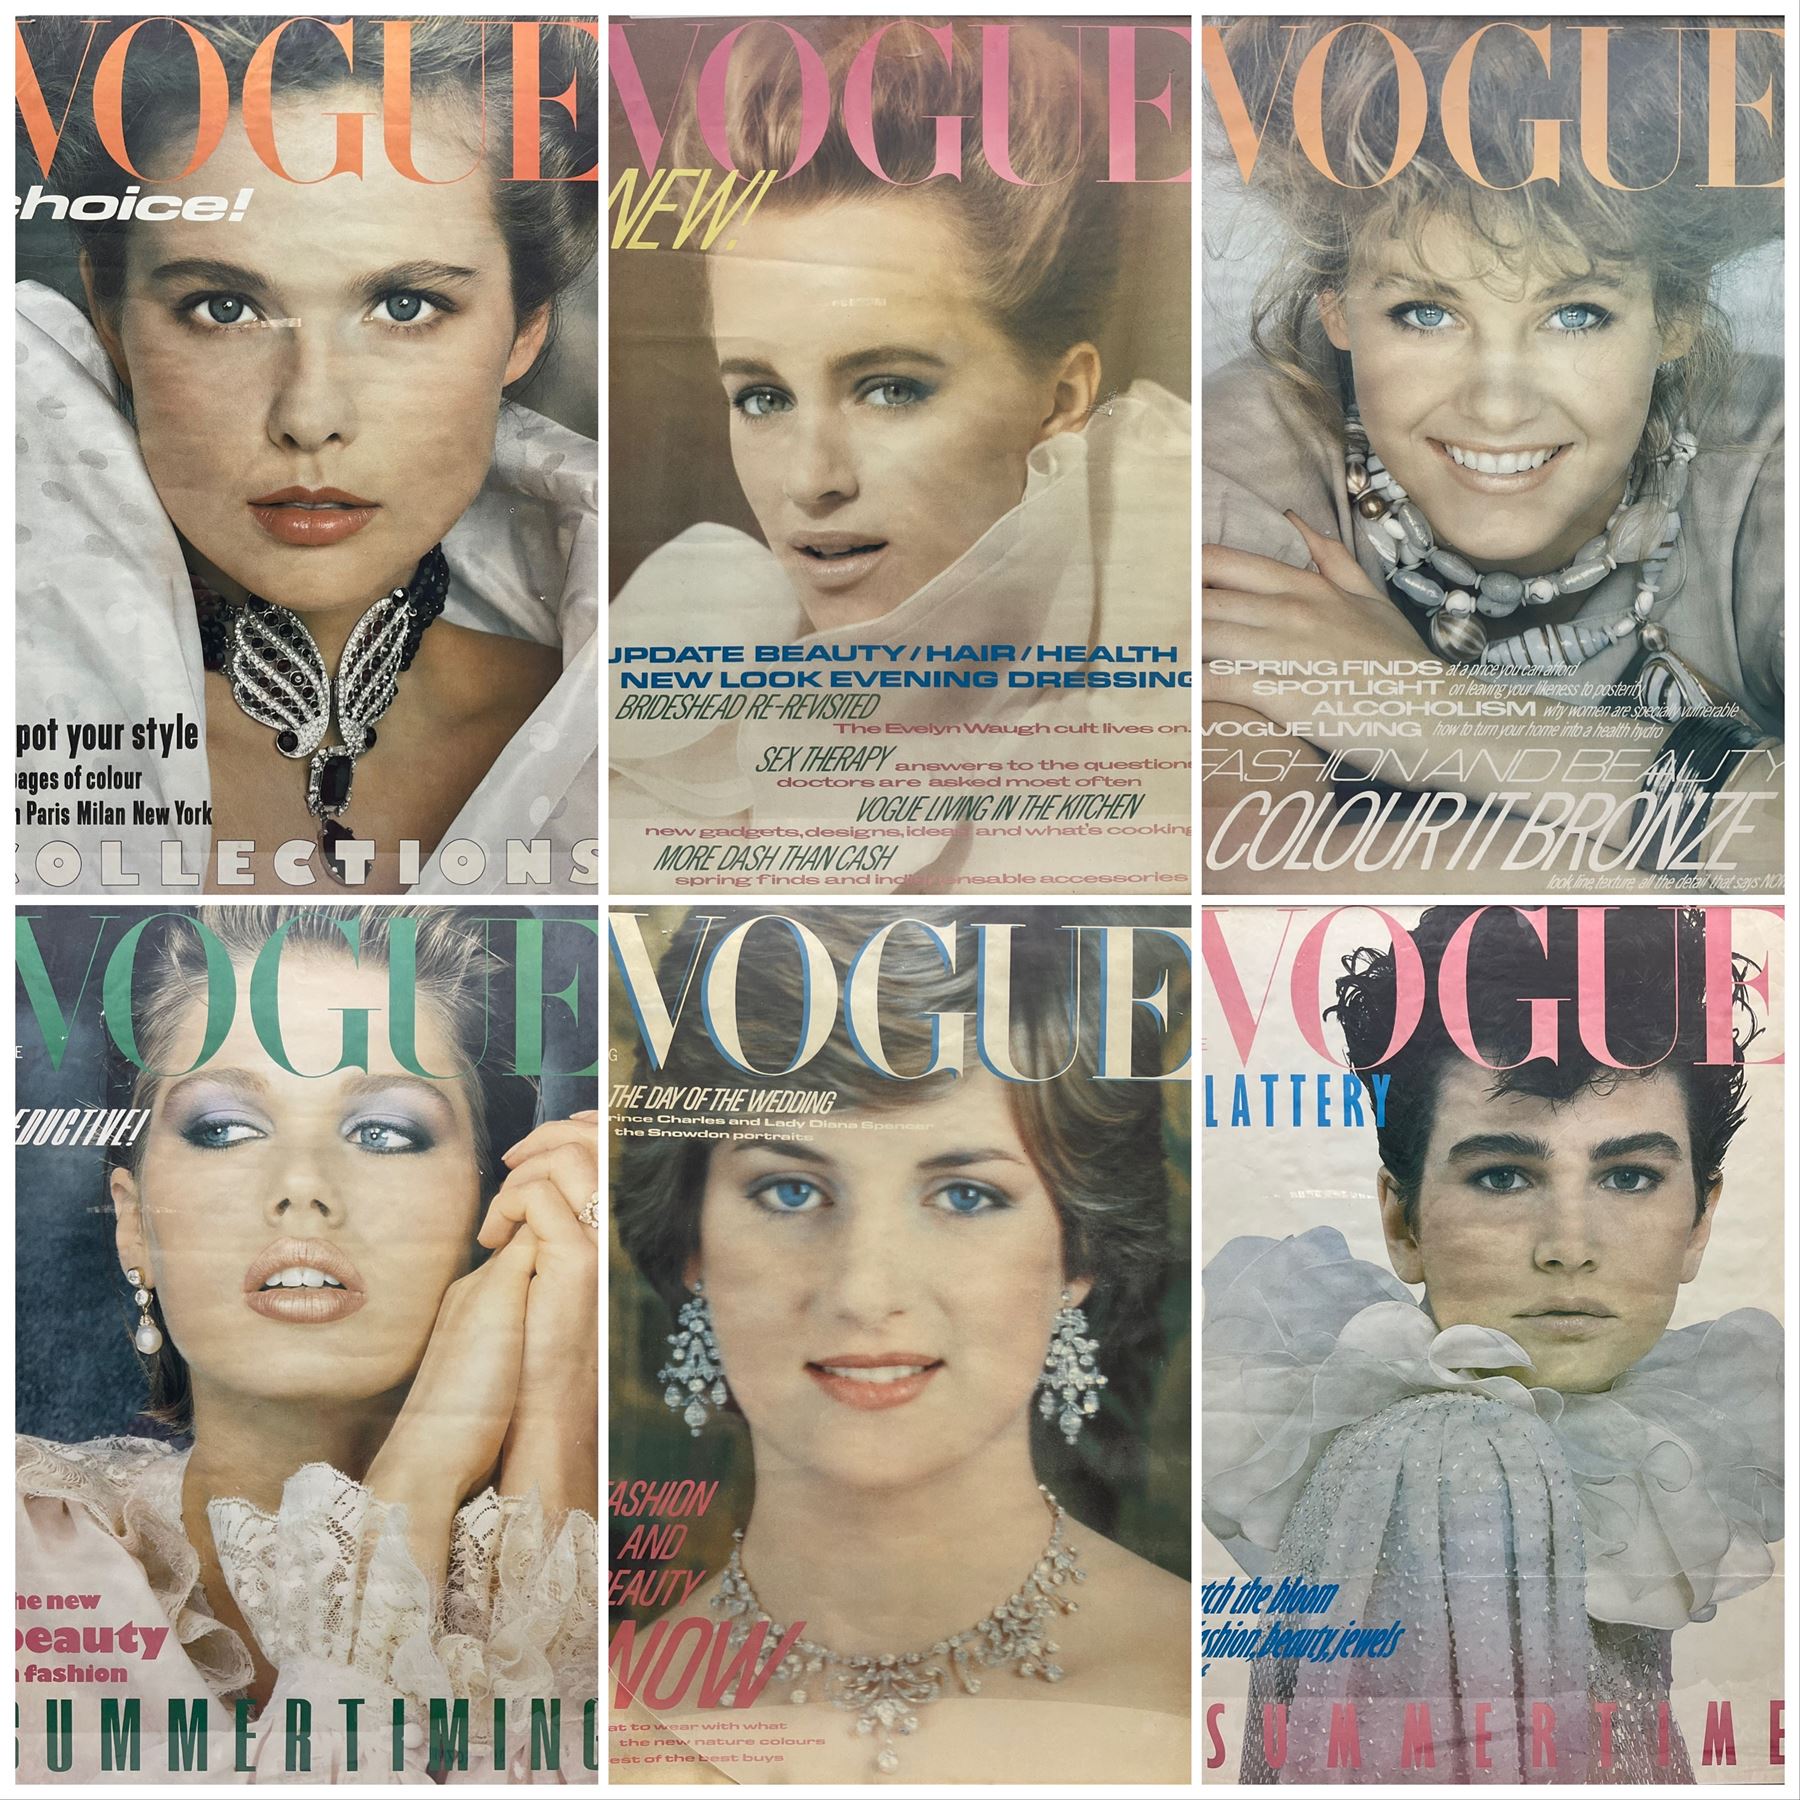 Vintage British Vogue Magazine Cover Posters from Feb